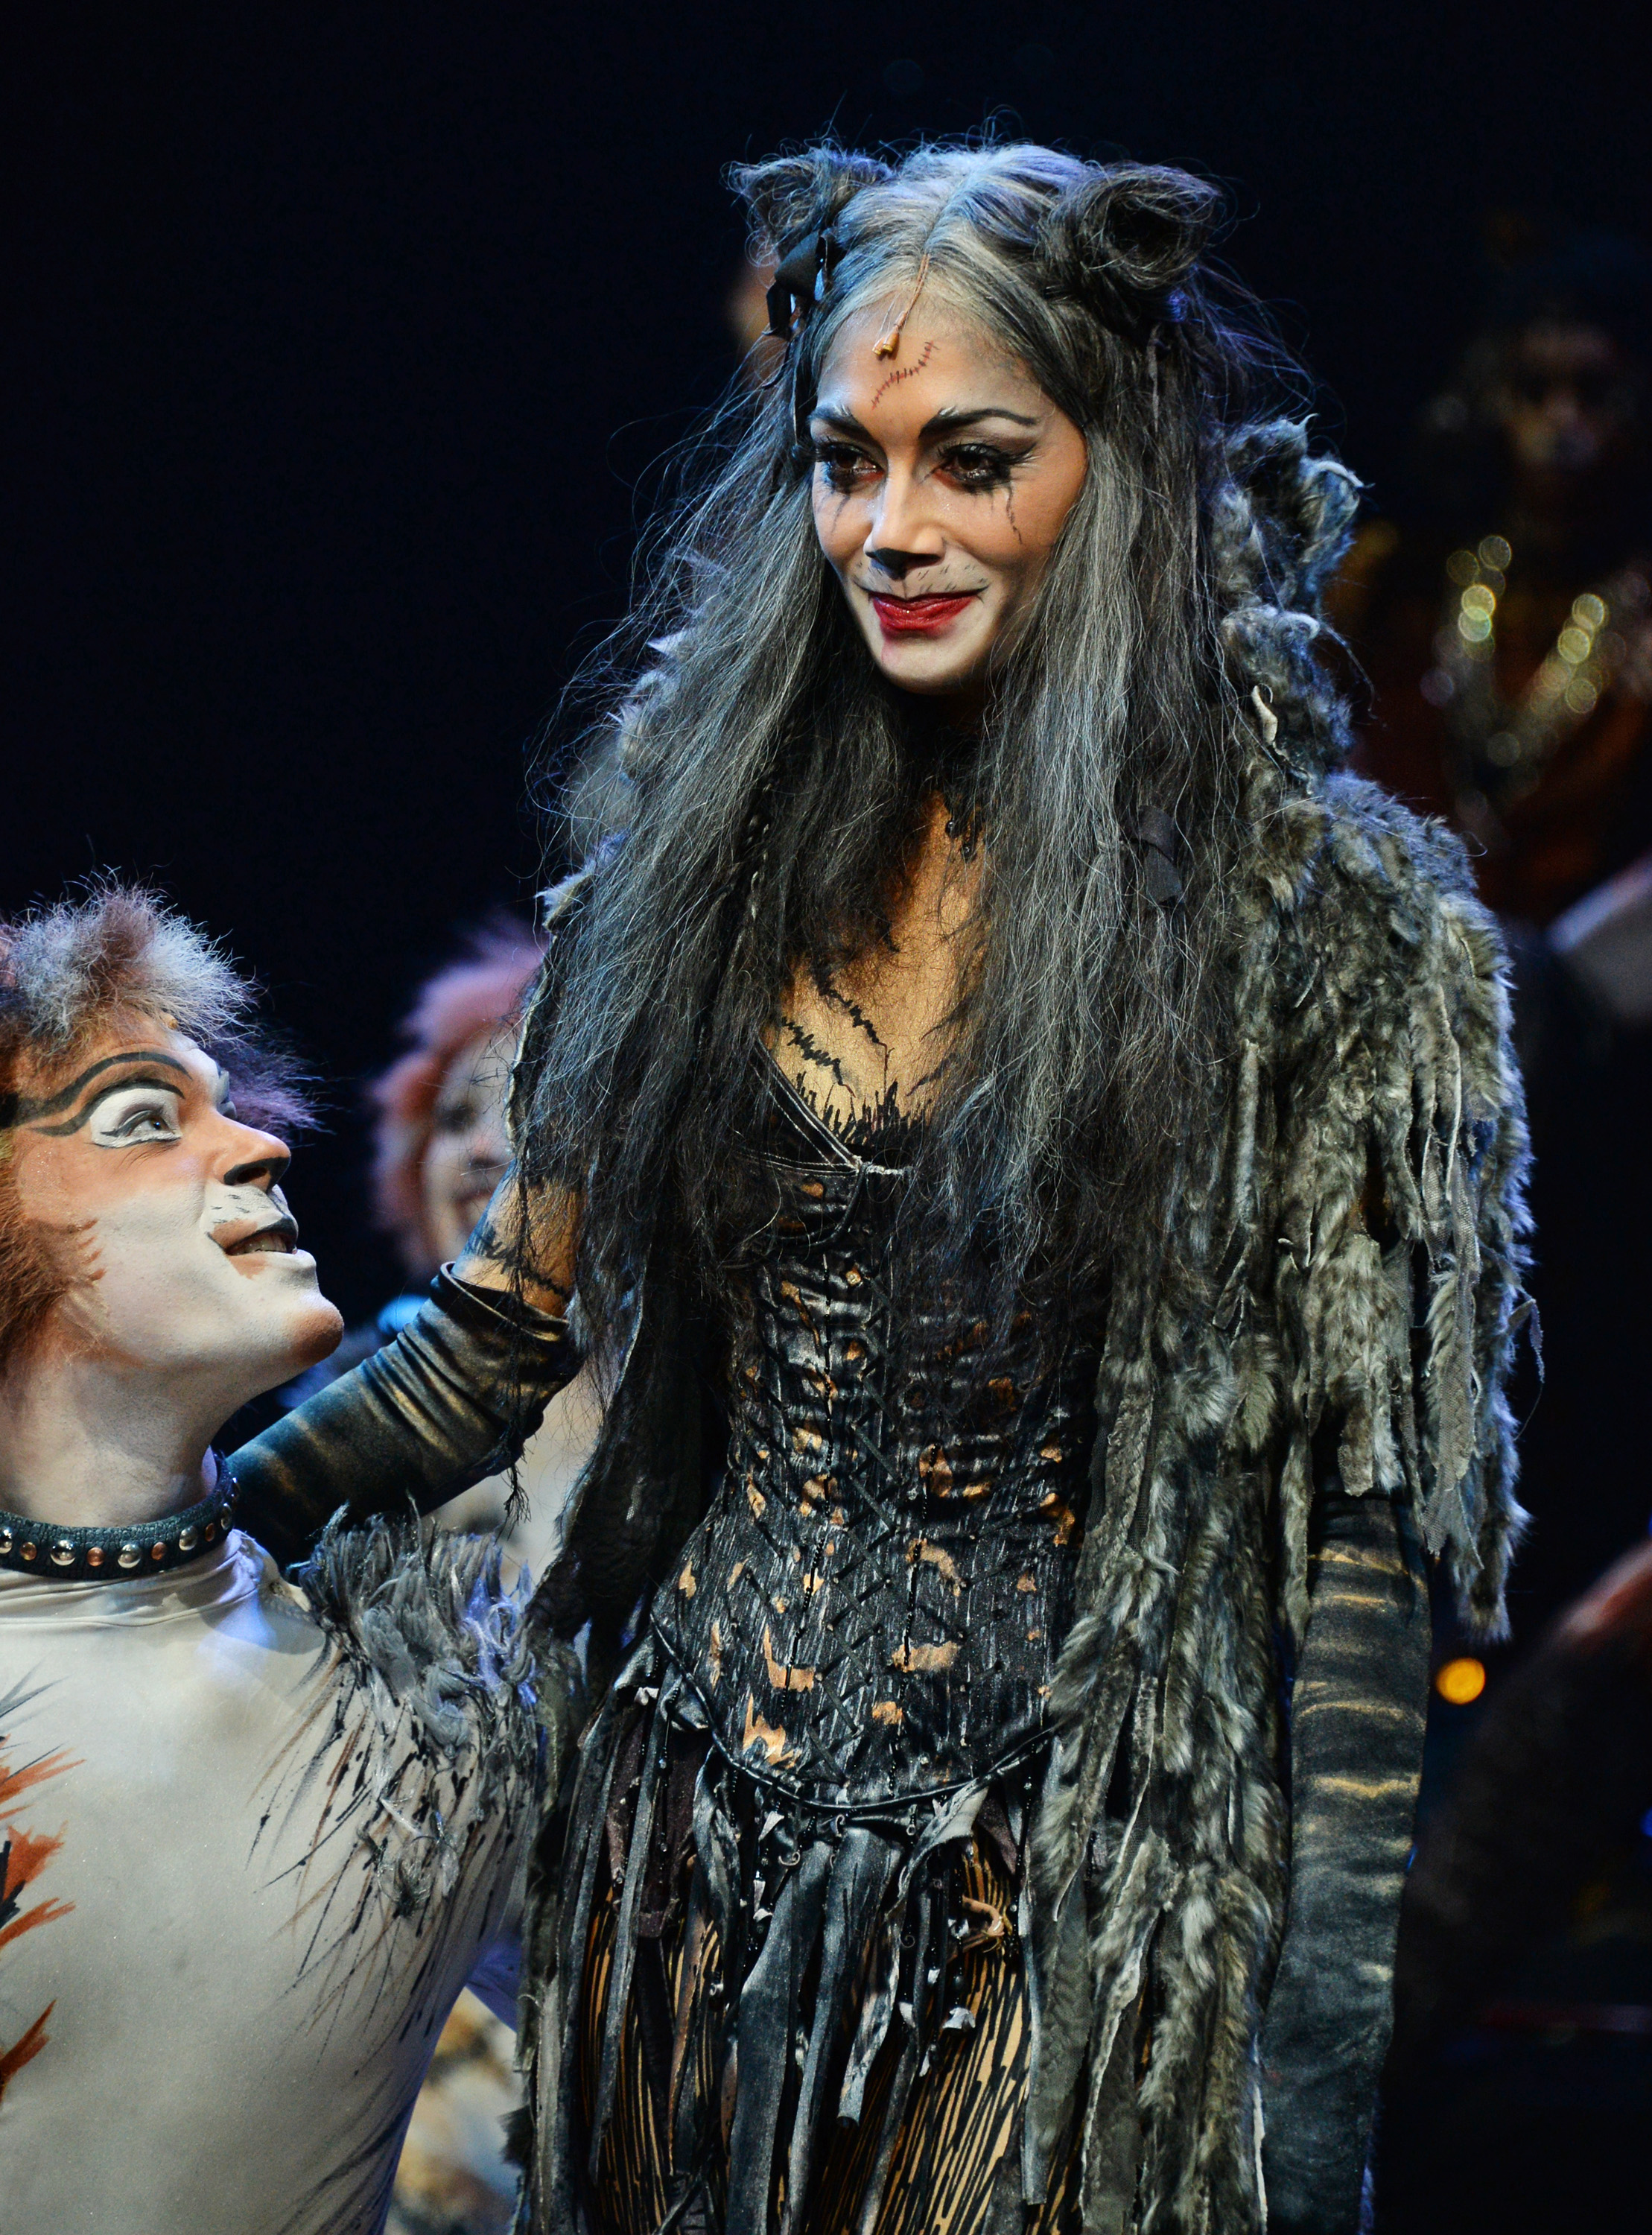 bows at the curtain call during the press night performance of "Cats" as Nicole Scherzinger joins the cast at the London Palladium on December 11, 2014 in London, England.